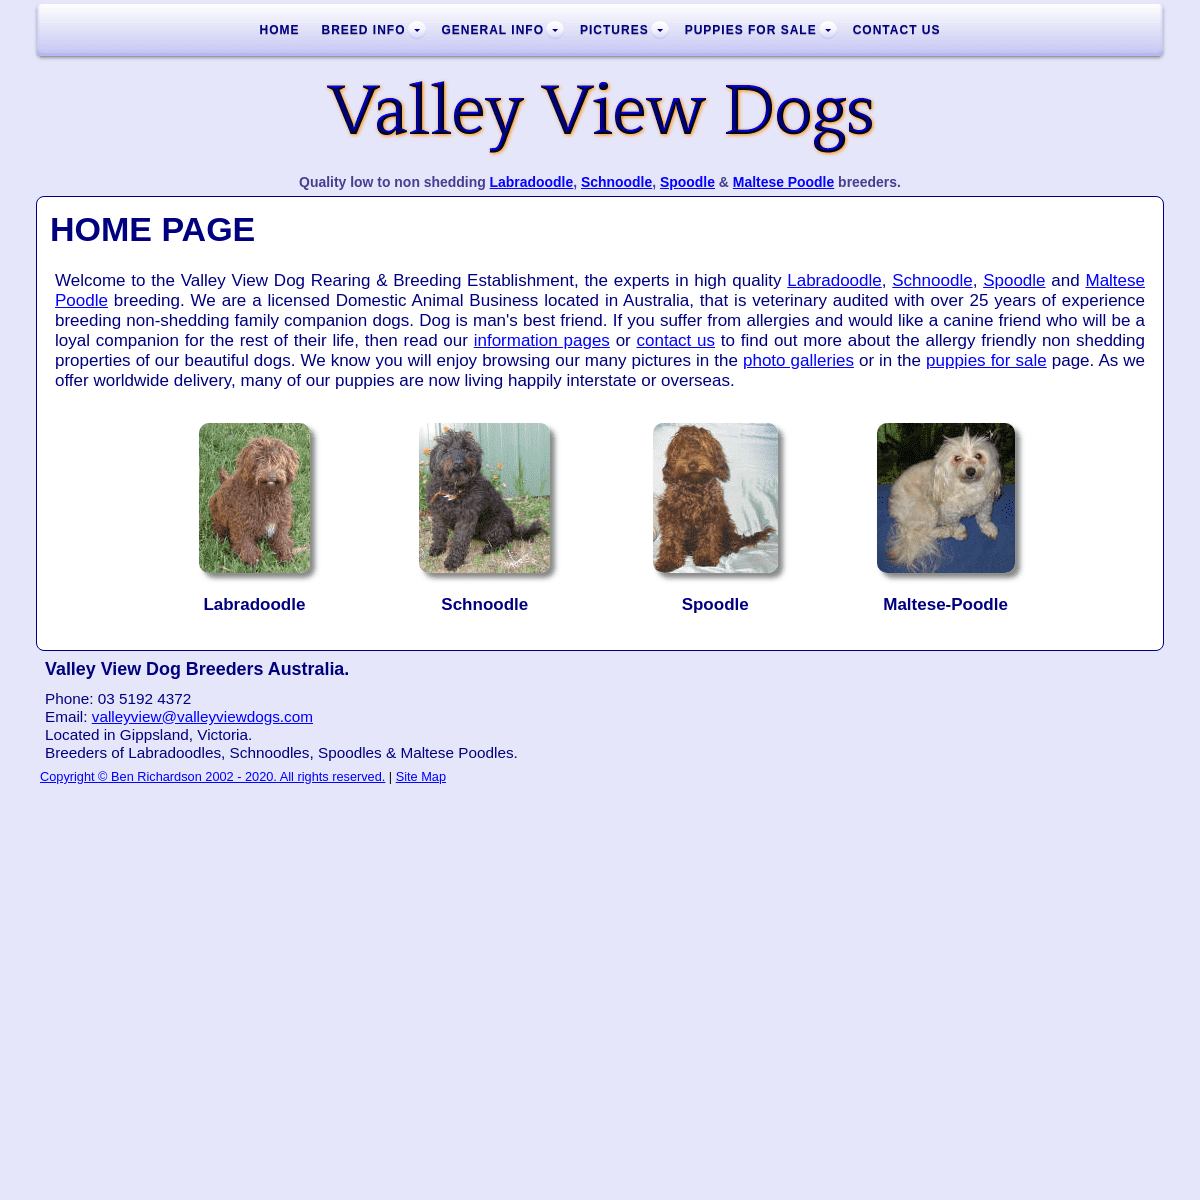 A complete backup of valleyviewdogs.com